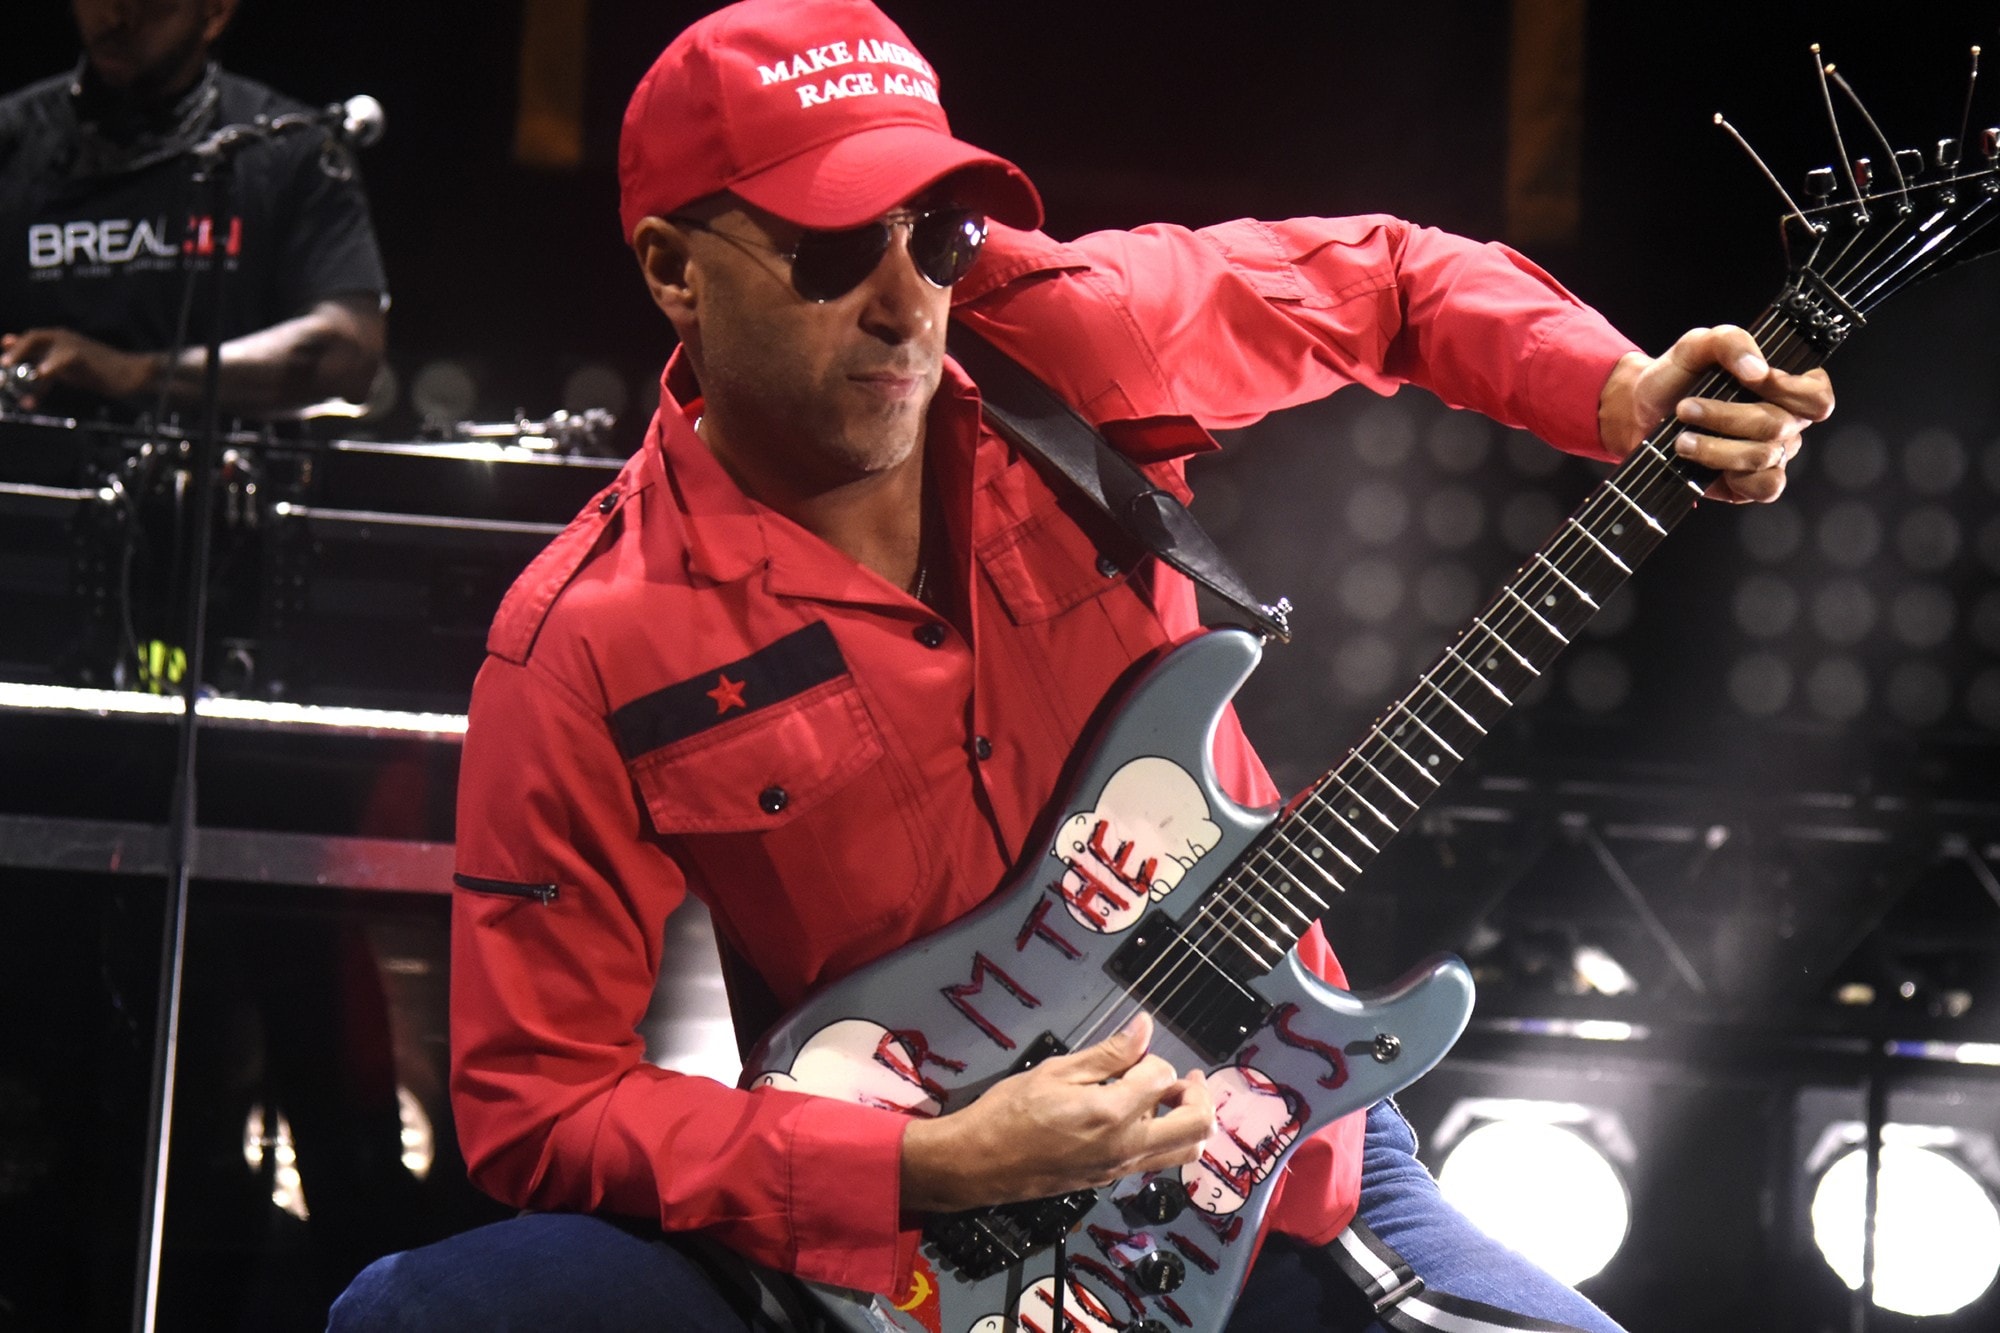 Rage Against The Machine Tom Morello Autobiography Selling for $300 HYPEBEAST Music News Reunion Tour Run The Jewels Photo Book Art